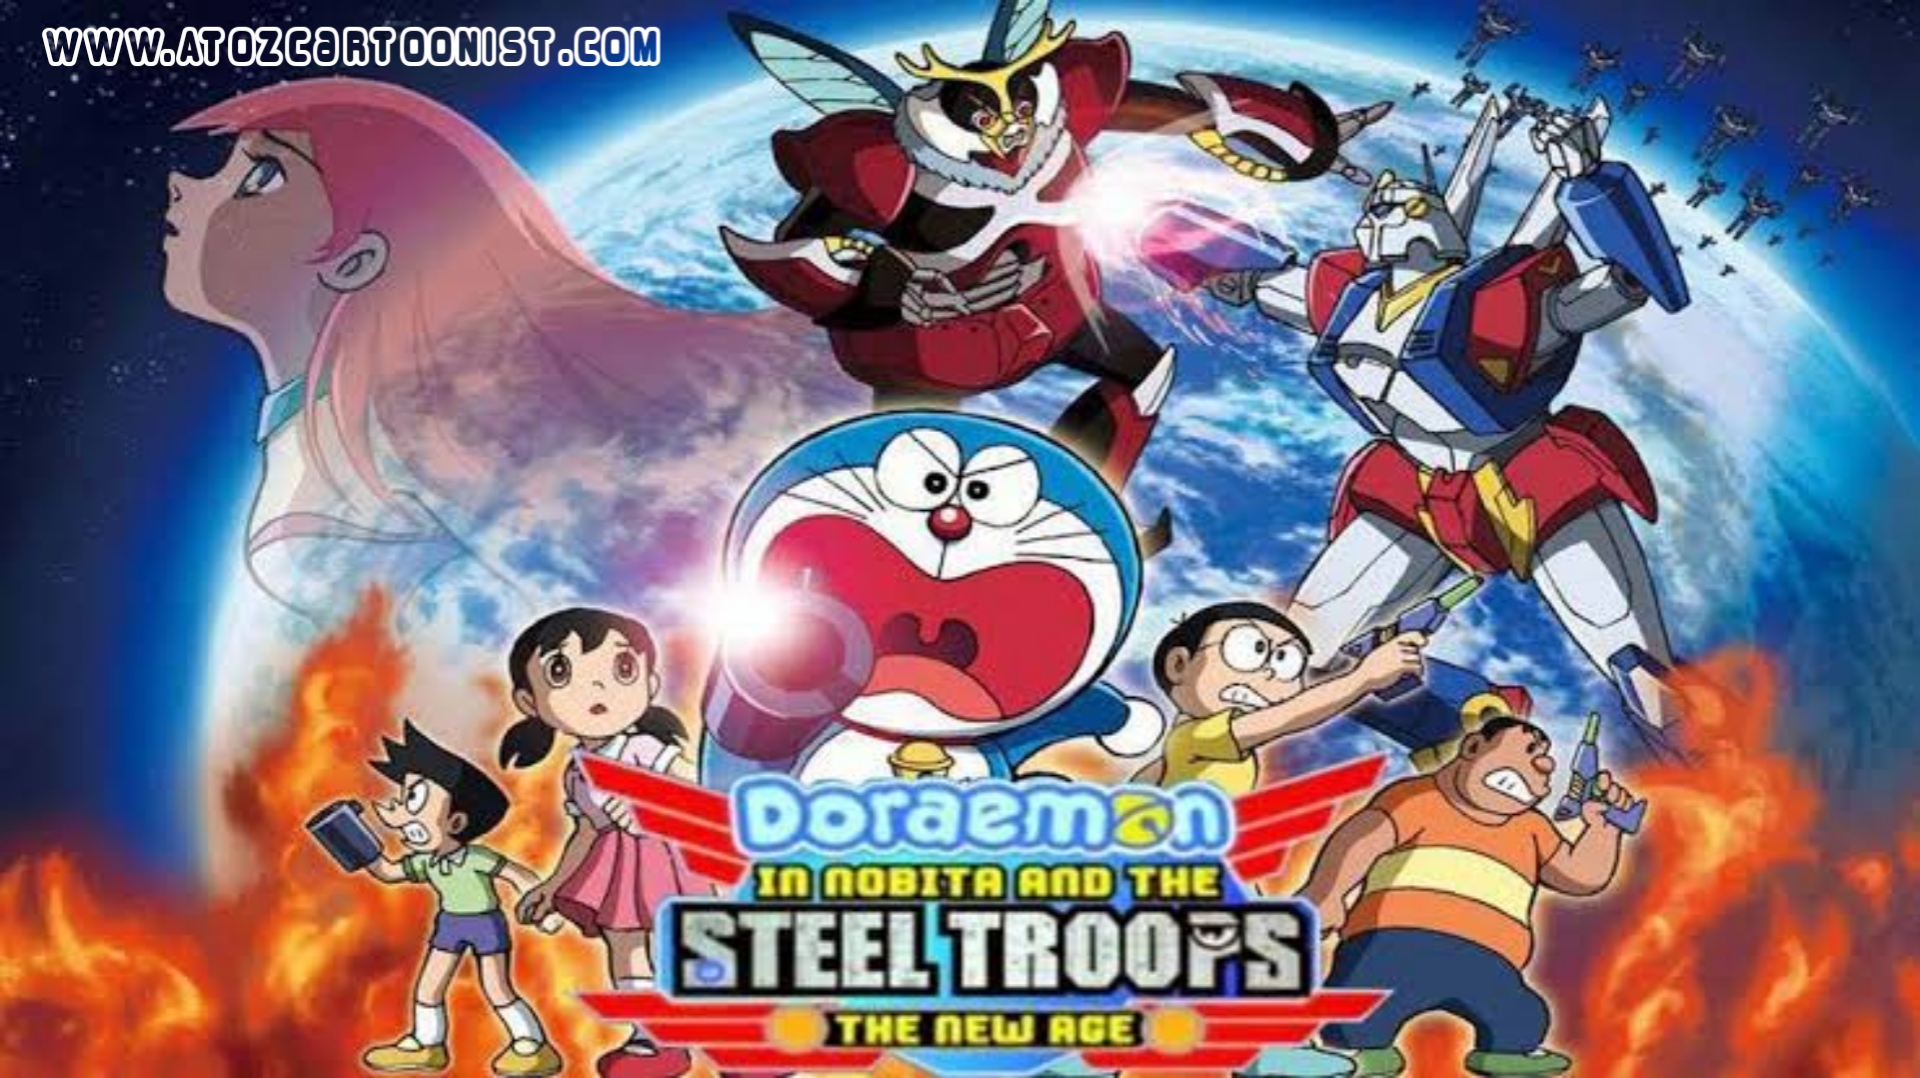 DORAEMON IN NOBITA AND THE STEEL TROOPS (THE NEW AGE) FULL MOVIE IN